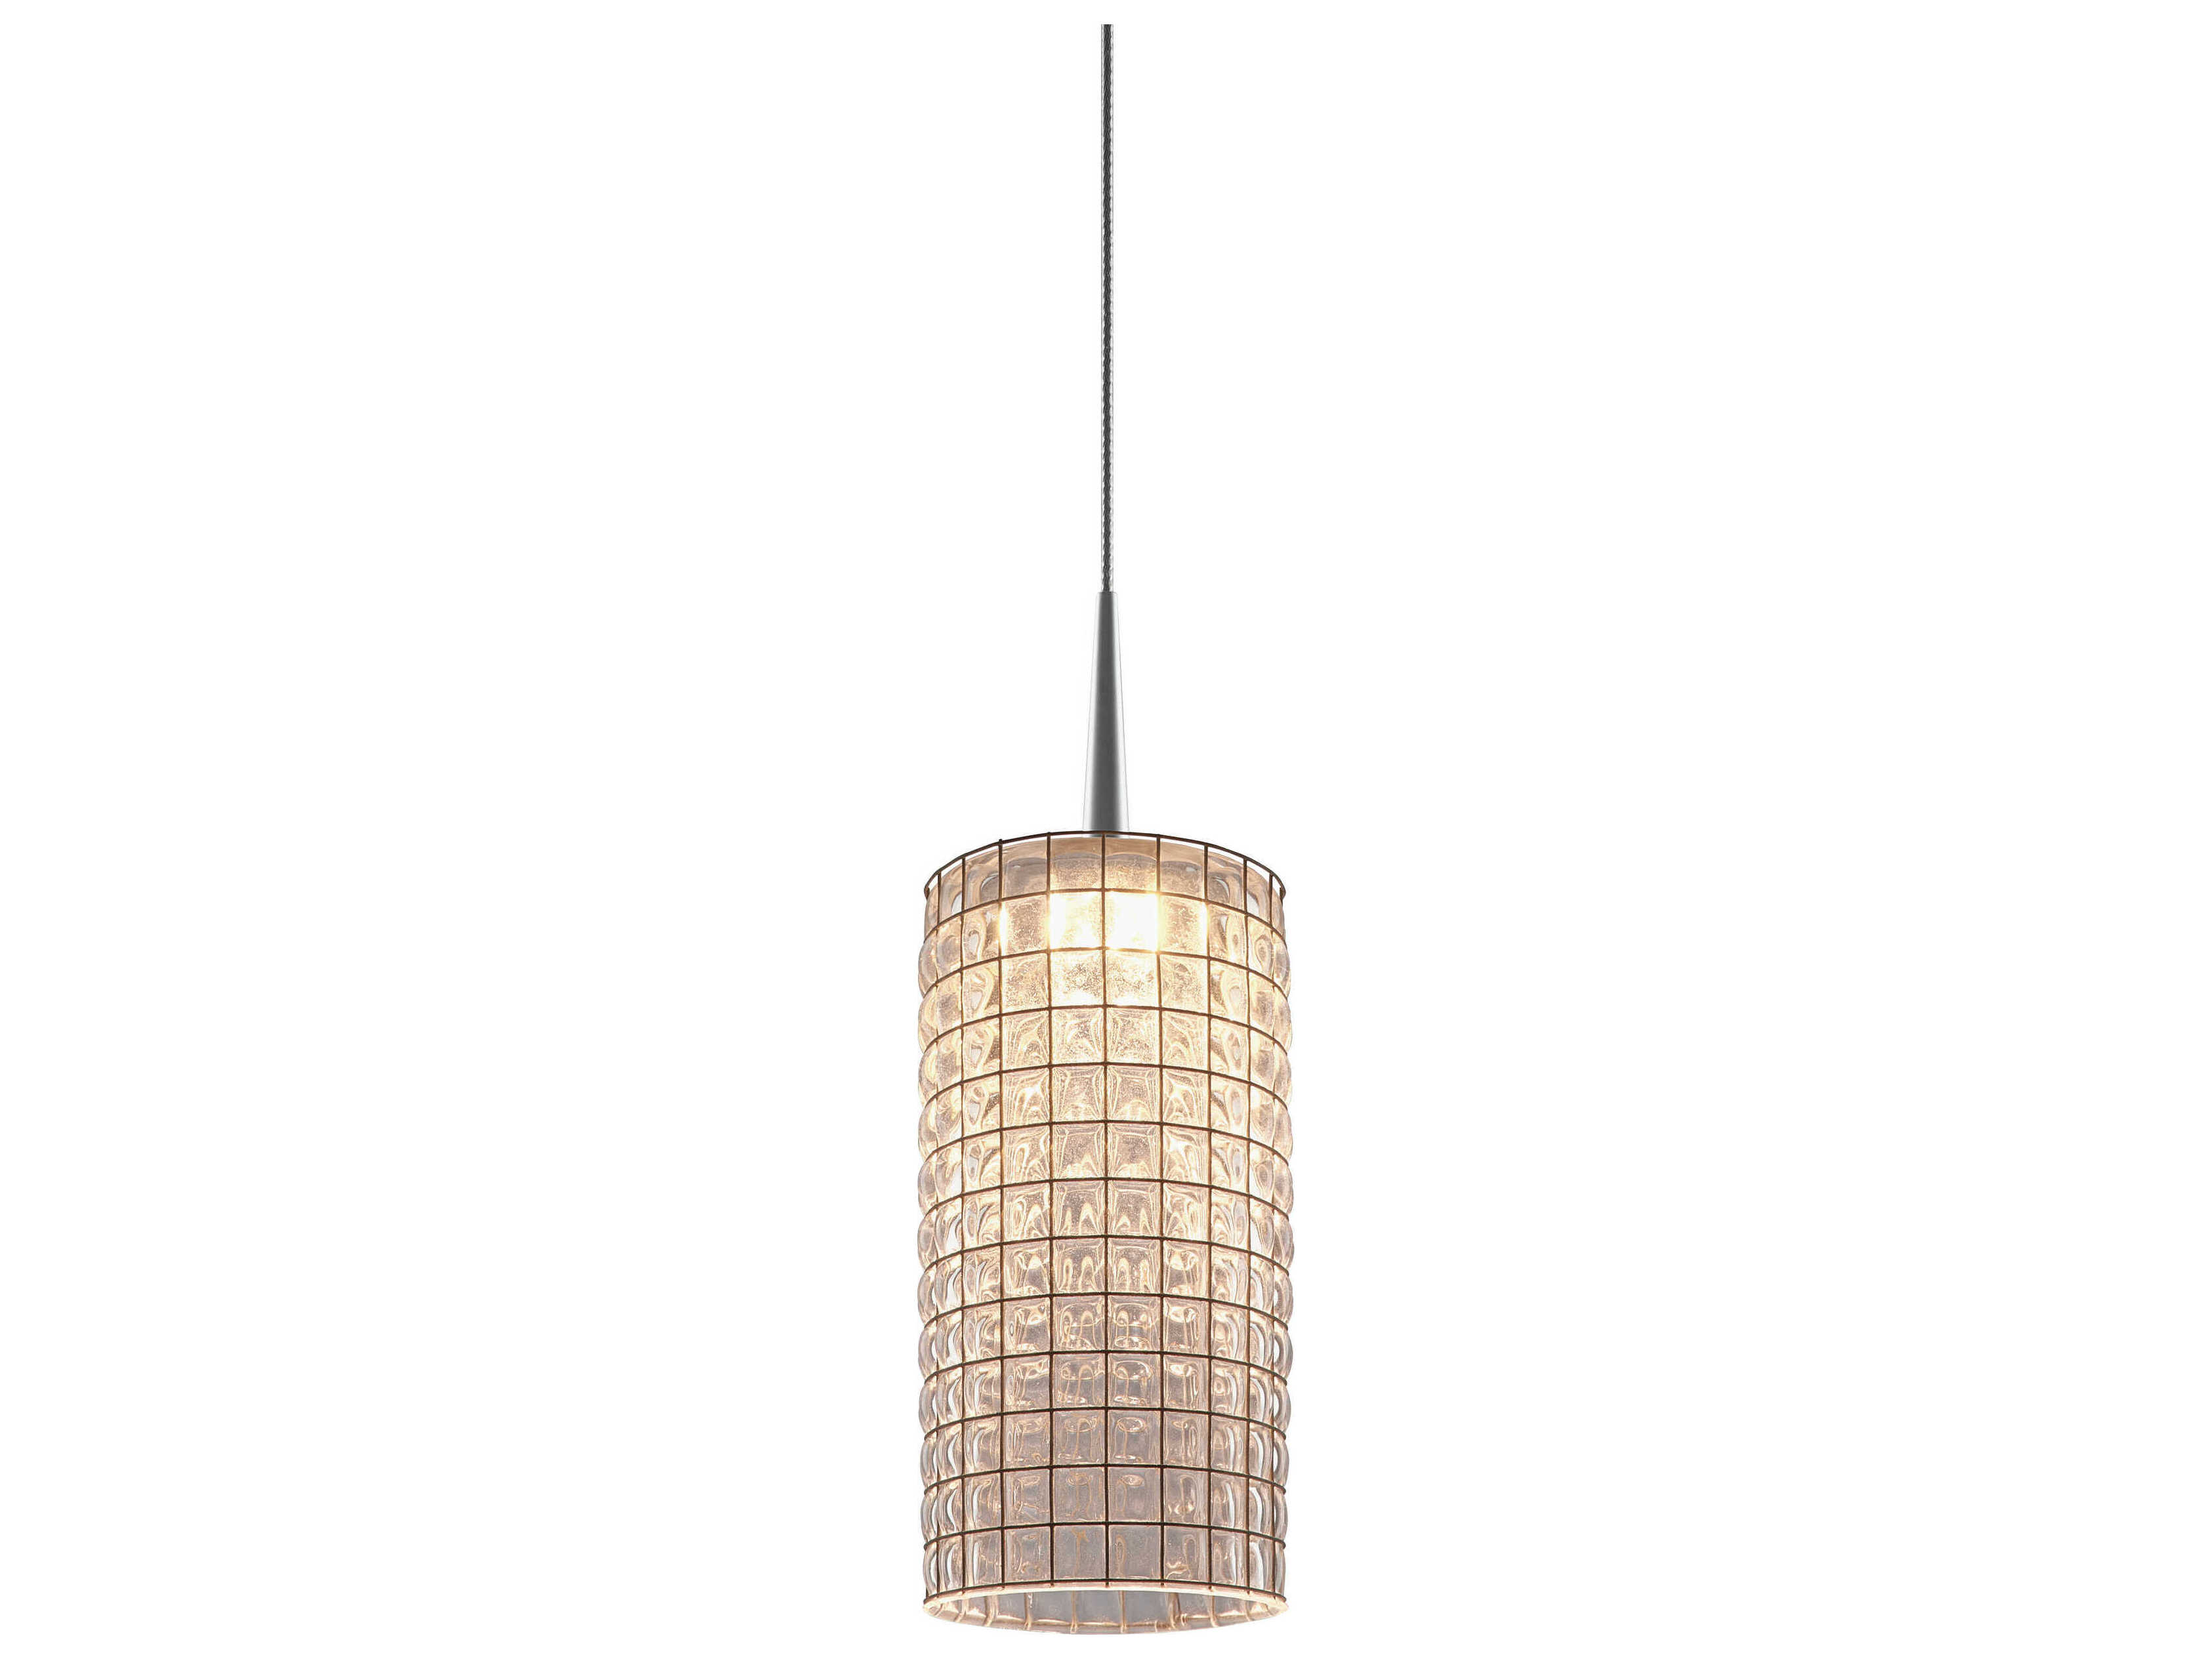 dialekt Bedst Tranquility Bruck Lighting Sierra 3'' Wide LED Mini Pendant with Clear and Wire Mesh  Glass Shade | BK223113